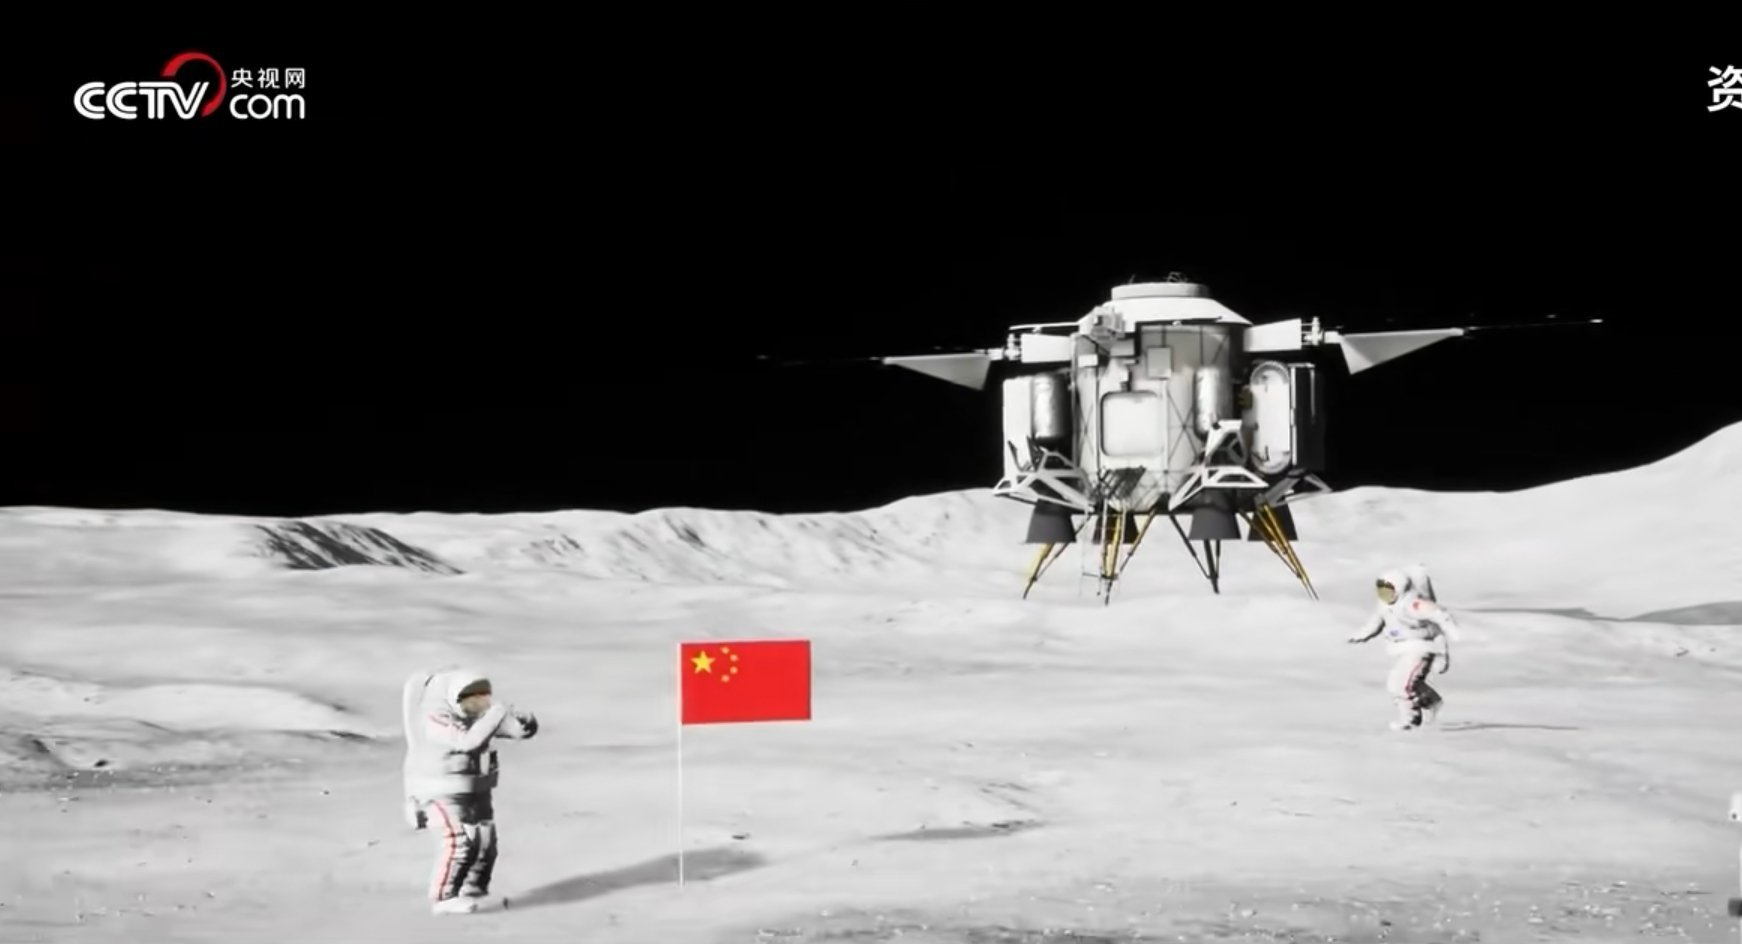 This animation from China Aerospace Science and Technology Corporation shows what China's first crewed moon lander would look like on a future lunar mission with astronauts